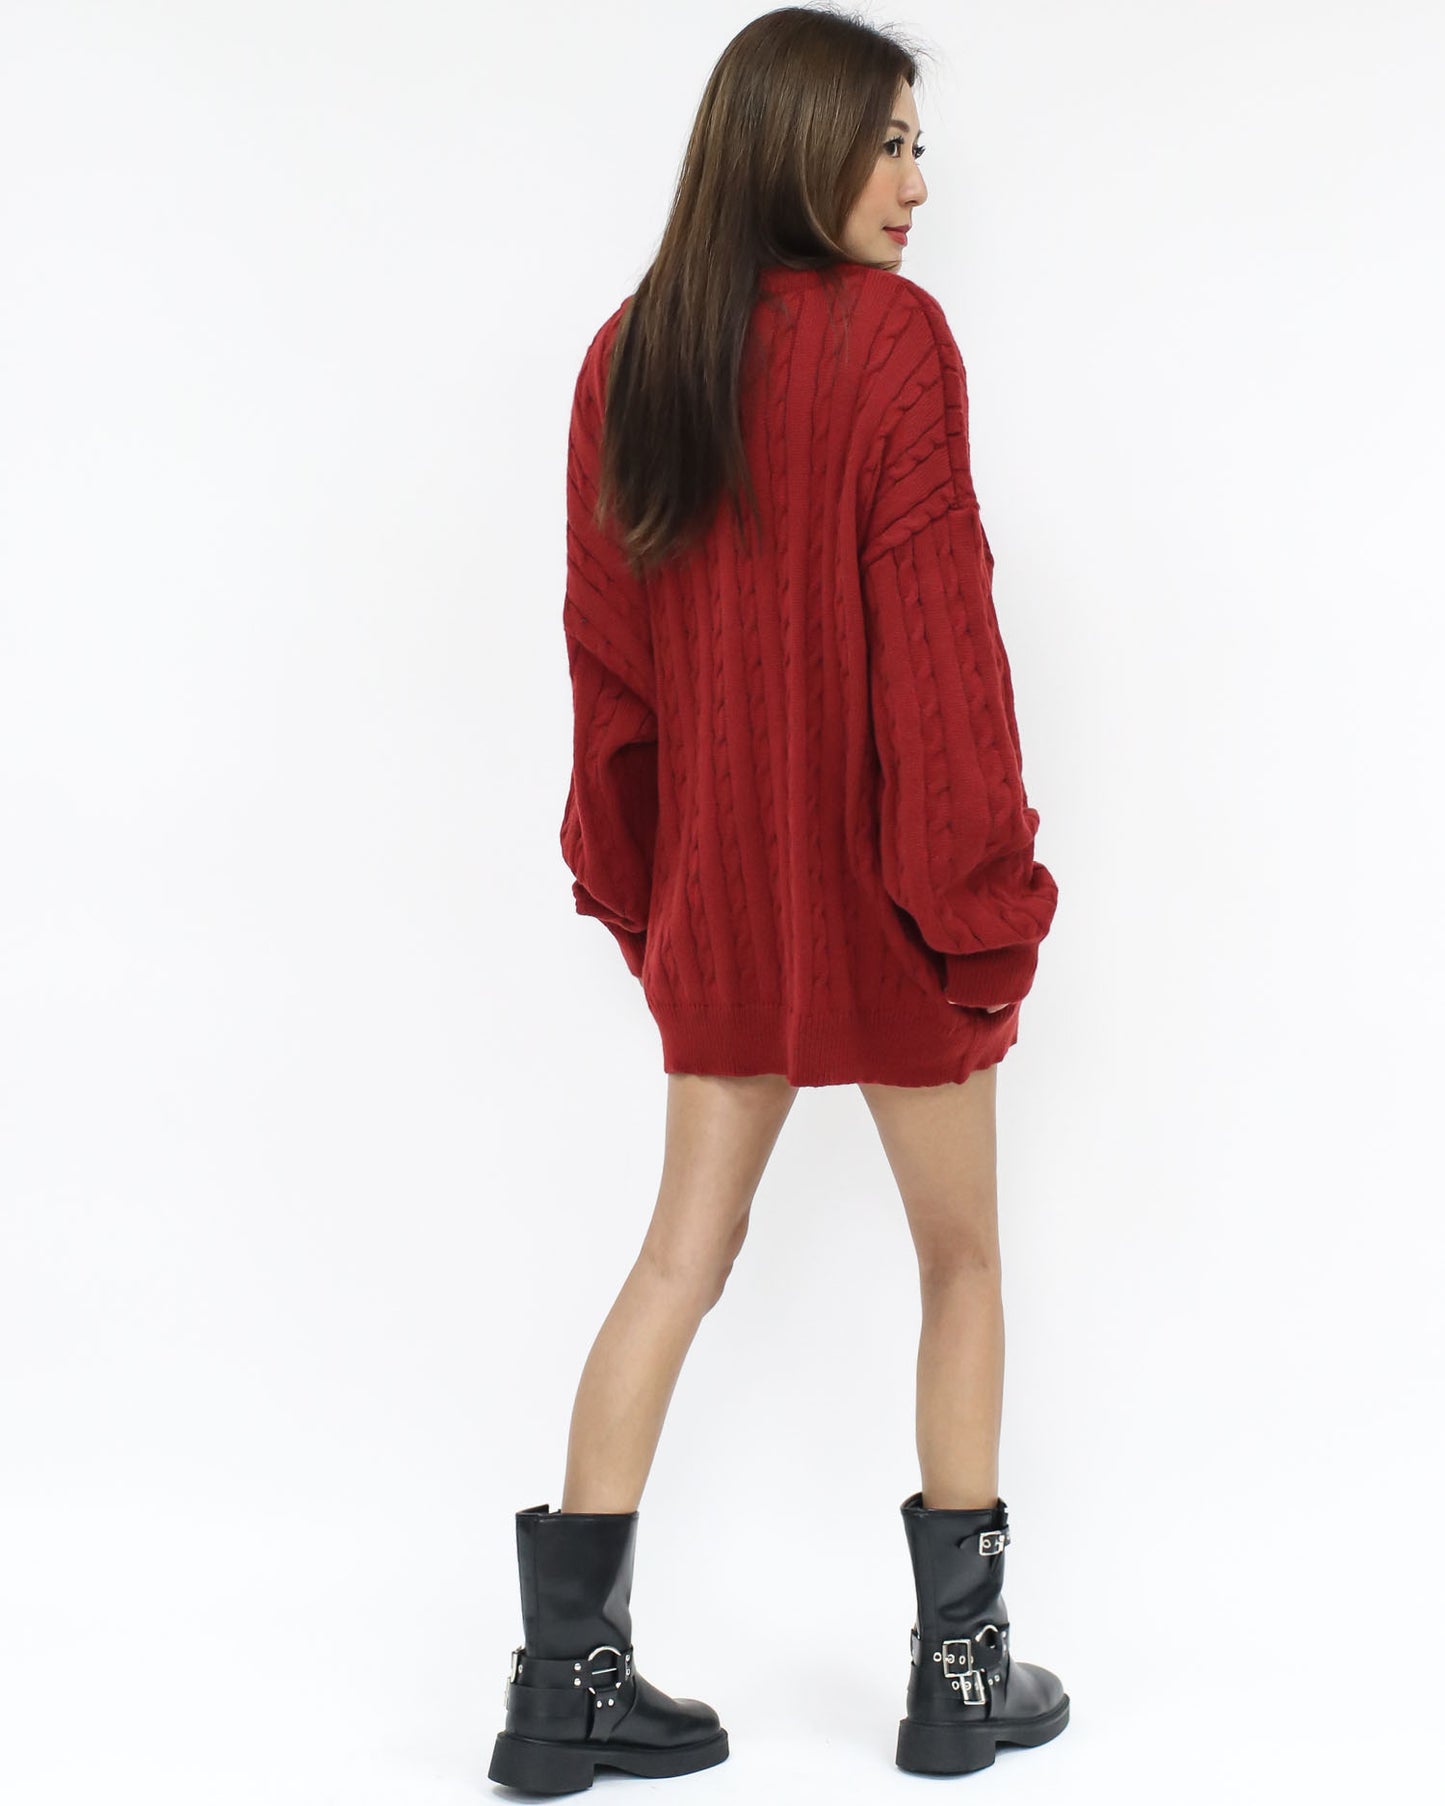 red twisted knitted top